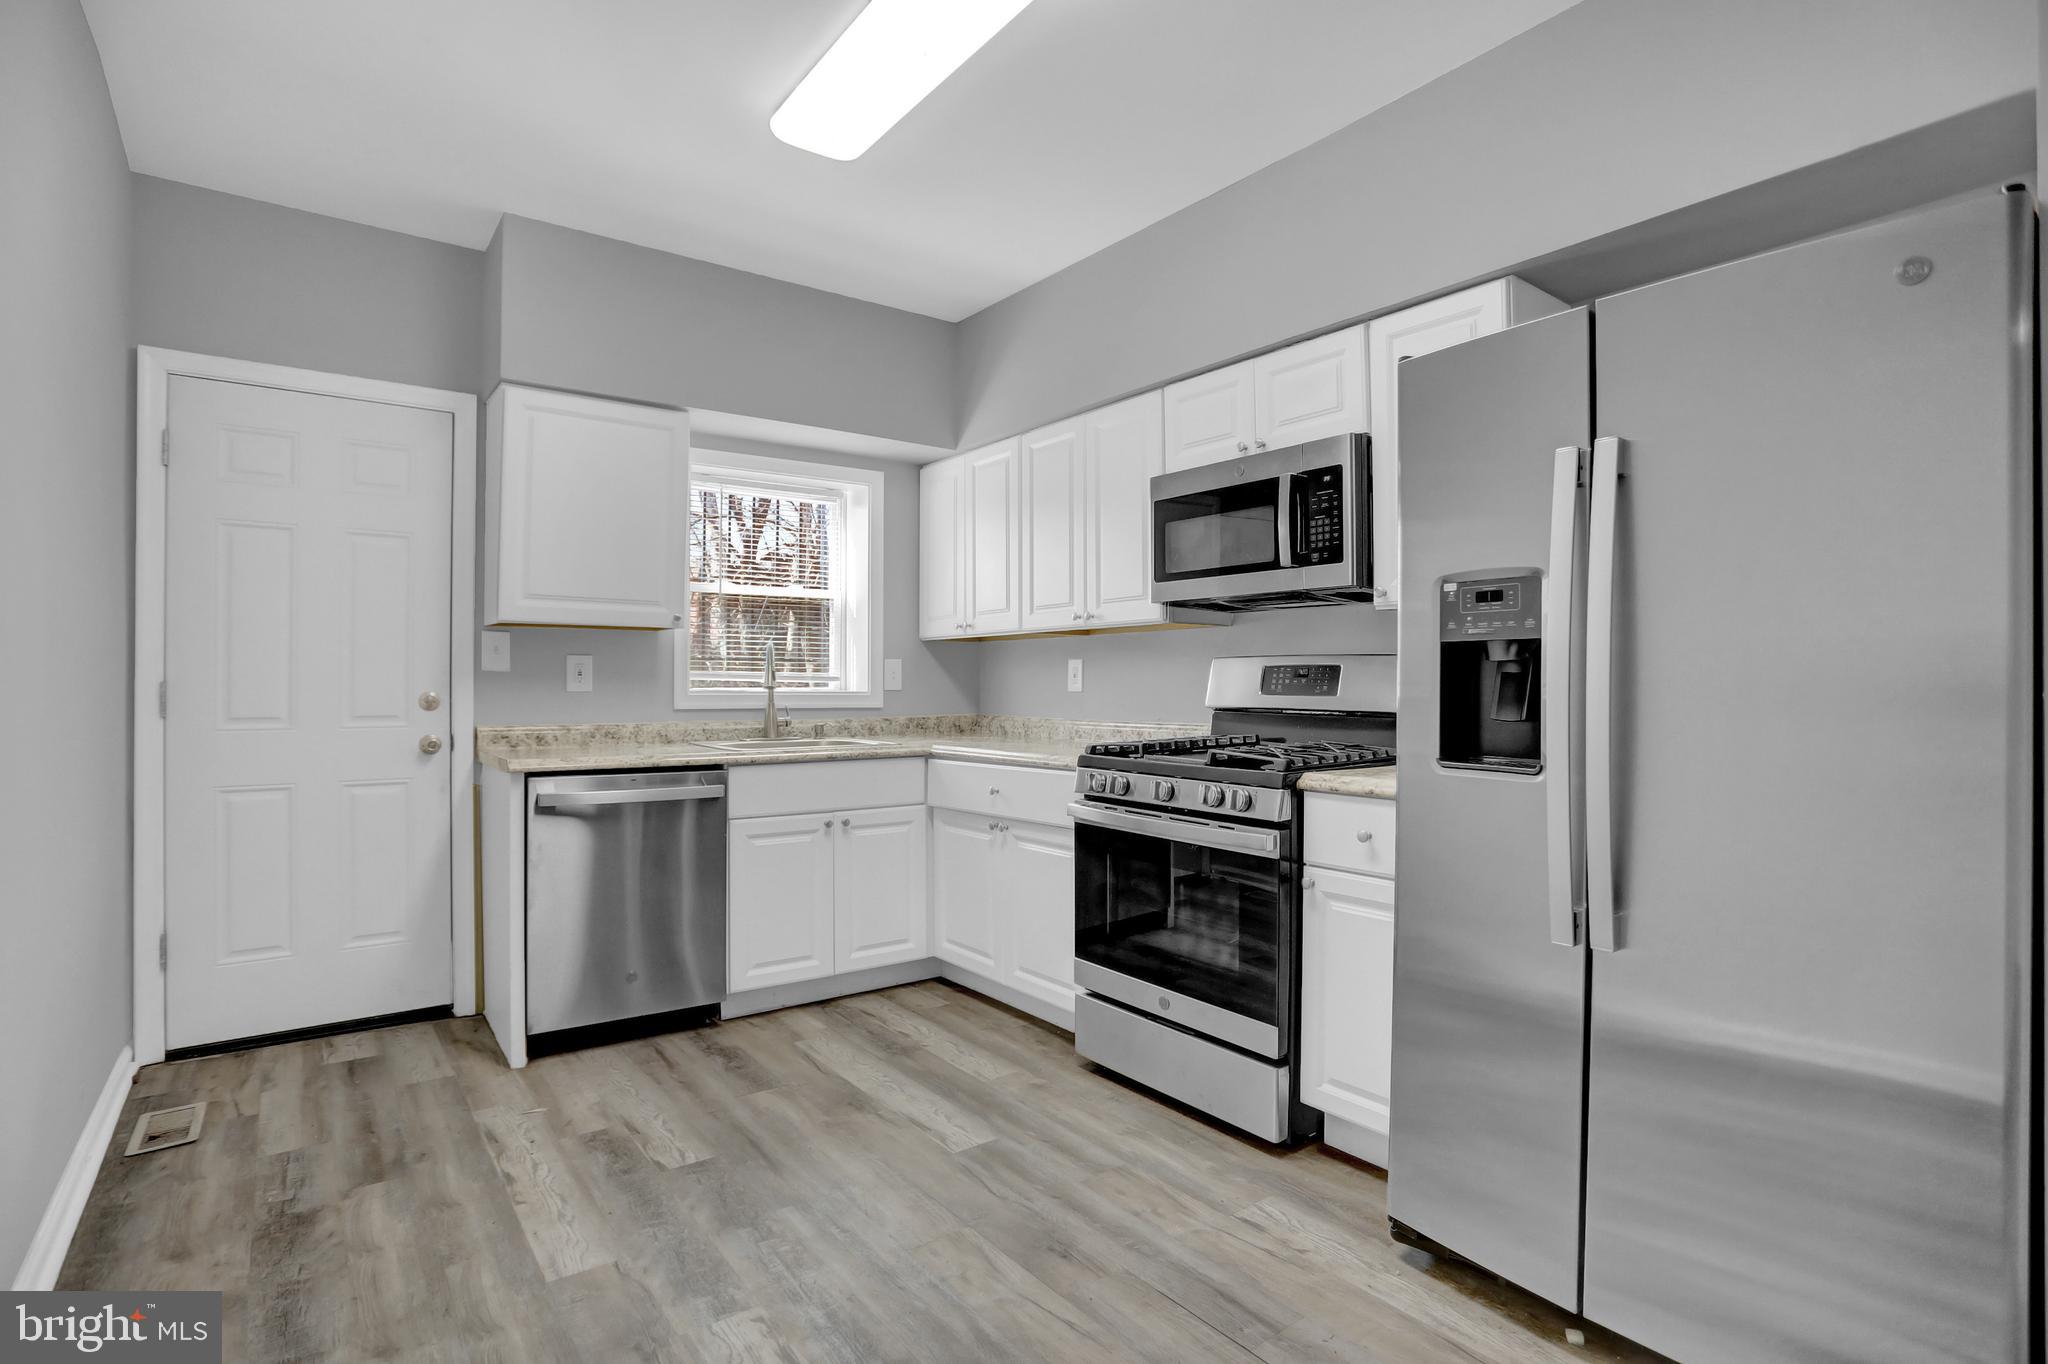 a kitchen with stainless steel appliances granite countertop a stove top oven a sink and a refrigerator